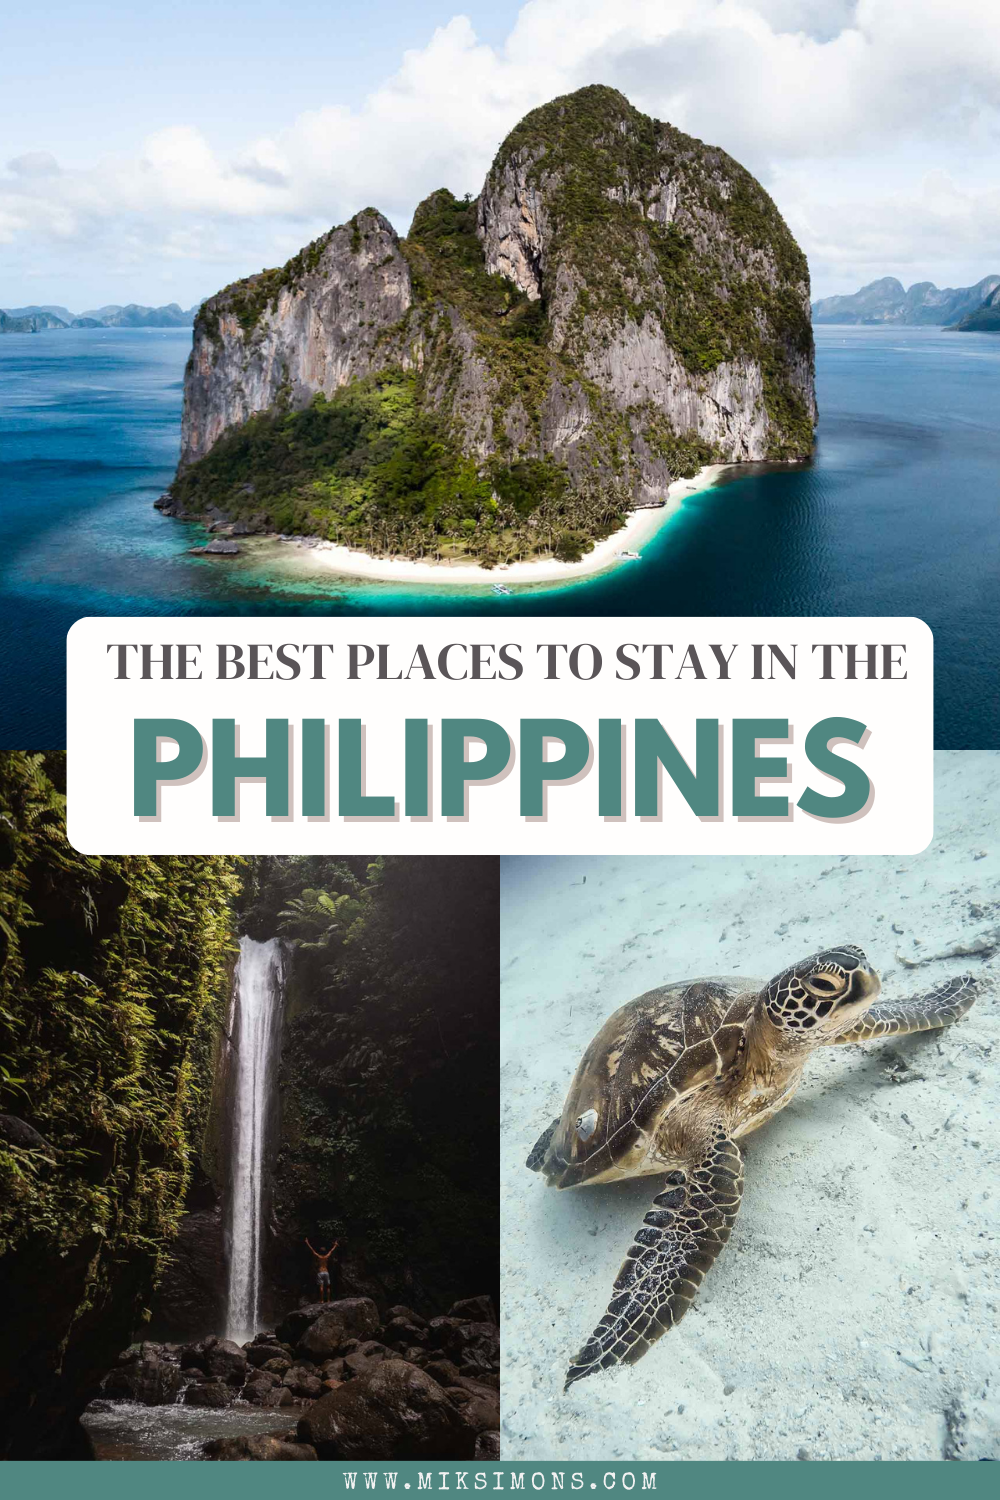 42 x Best hotels in the Philippines